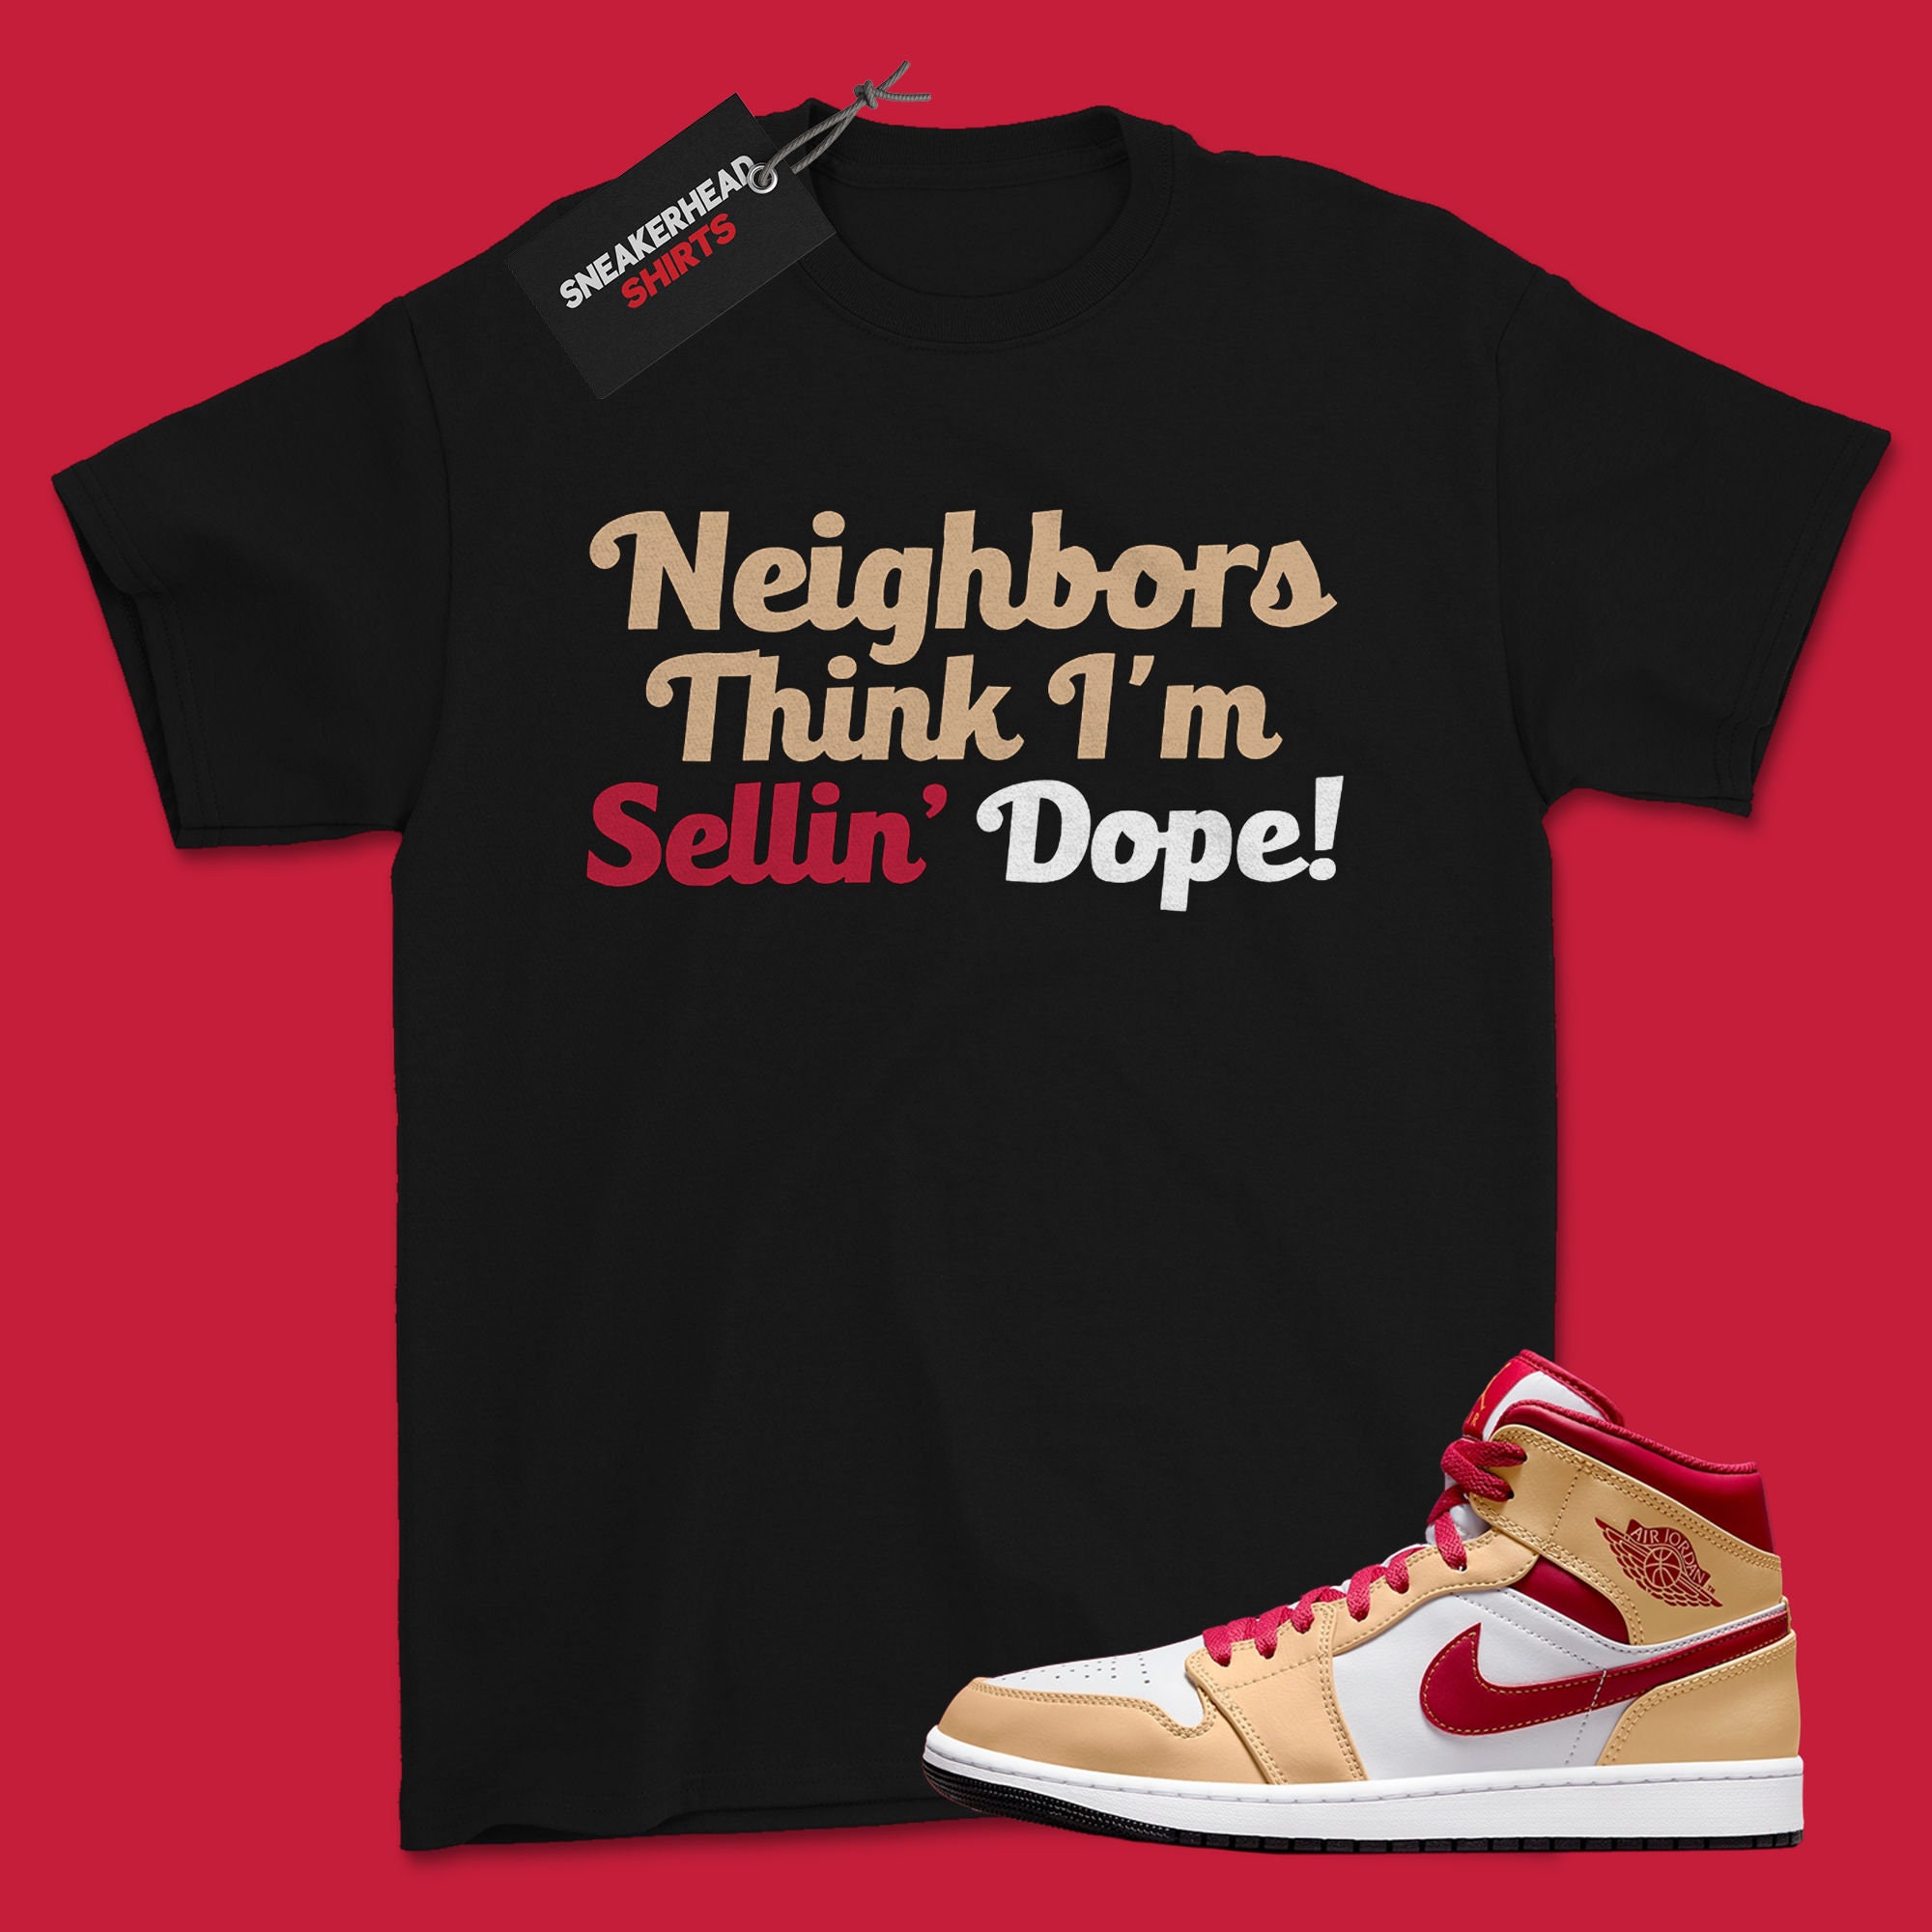 Sneaker head got dope shoes and swag for days Kids T-Shirt for